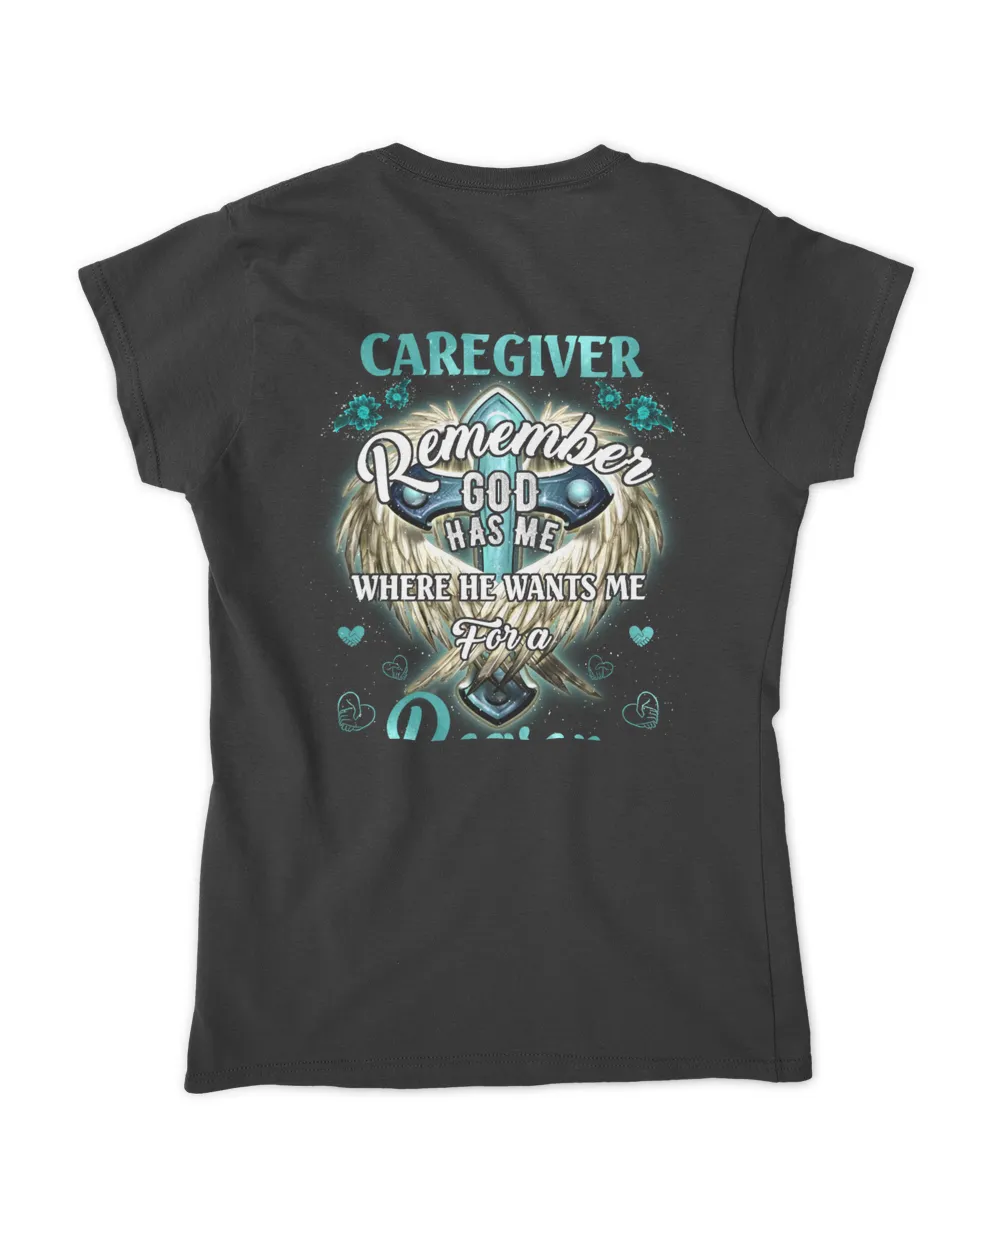 CAREGIVER REMEMBER GOD HAS ME WHERE HE WANTS ME FOR A REASON